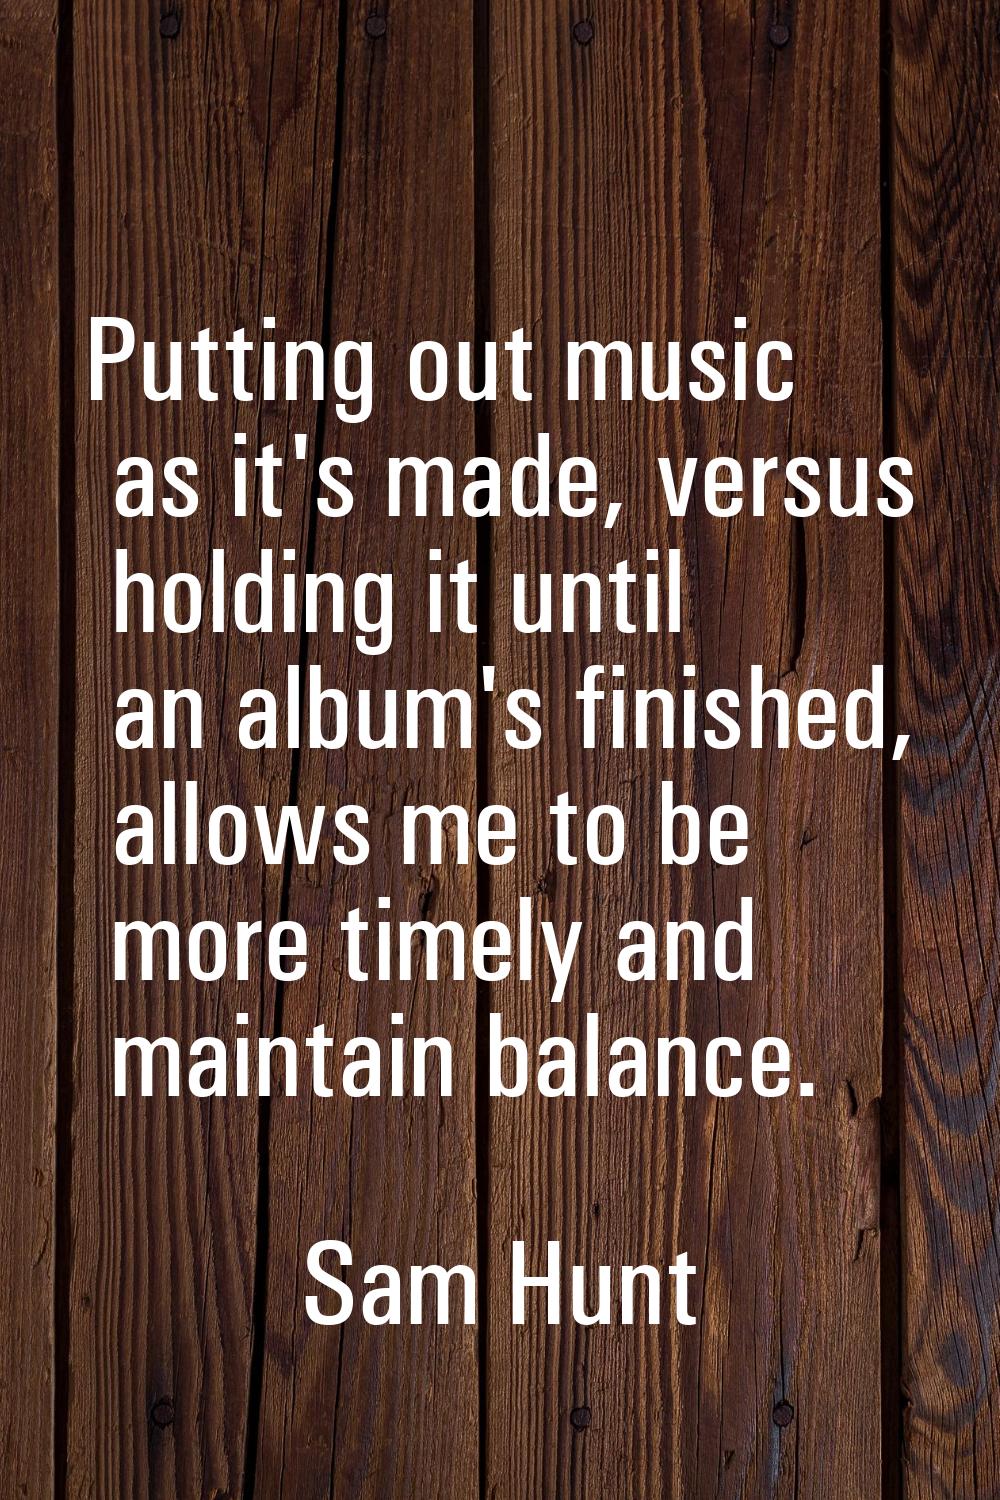 Putting out music as it's made, versus holding it until an album's finished, allows me to be more t